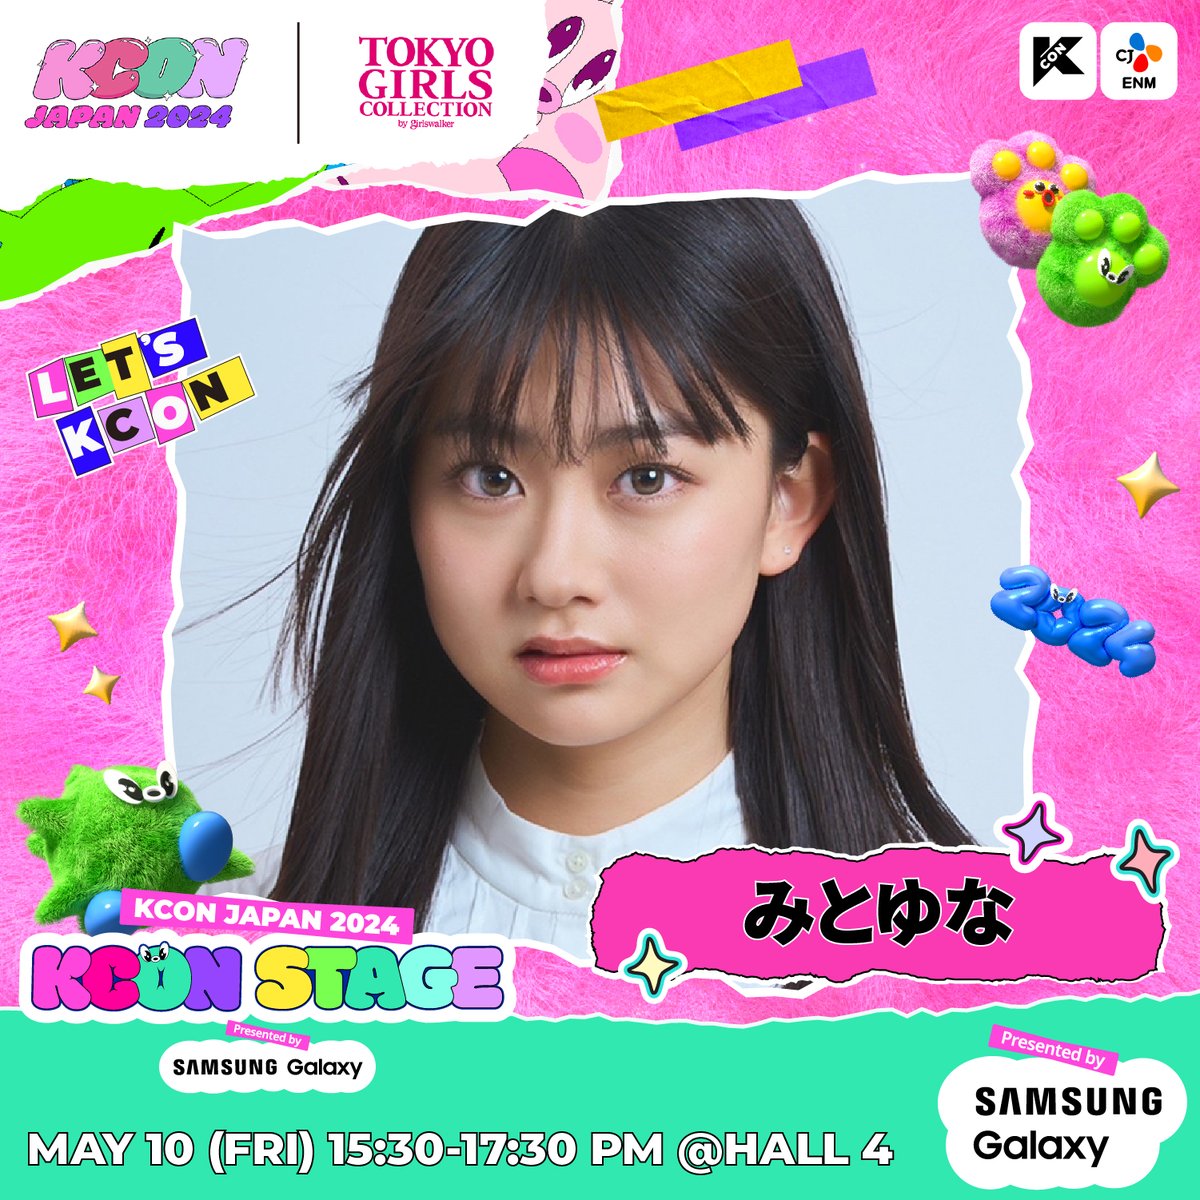 [#KCONJAPAN2024] TOKYO GIRLS COLLECTION LINEUP

📍 MAY 10 (FRI) 15:30 ~ 17:30PM 
📍 KCON STAGE HALL 4

💙FROM TGC 
#那須ほほみ / @hohomi_nasu
#のせりん / @noserlnx
#みとゆな / @yuna_3047

📢GET YOUR TICKET NOW 
🎫 bit.ly/3vrYG1I